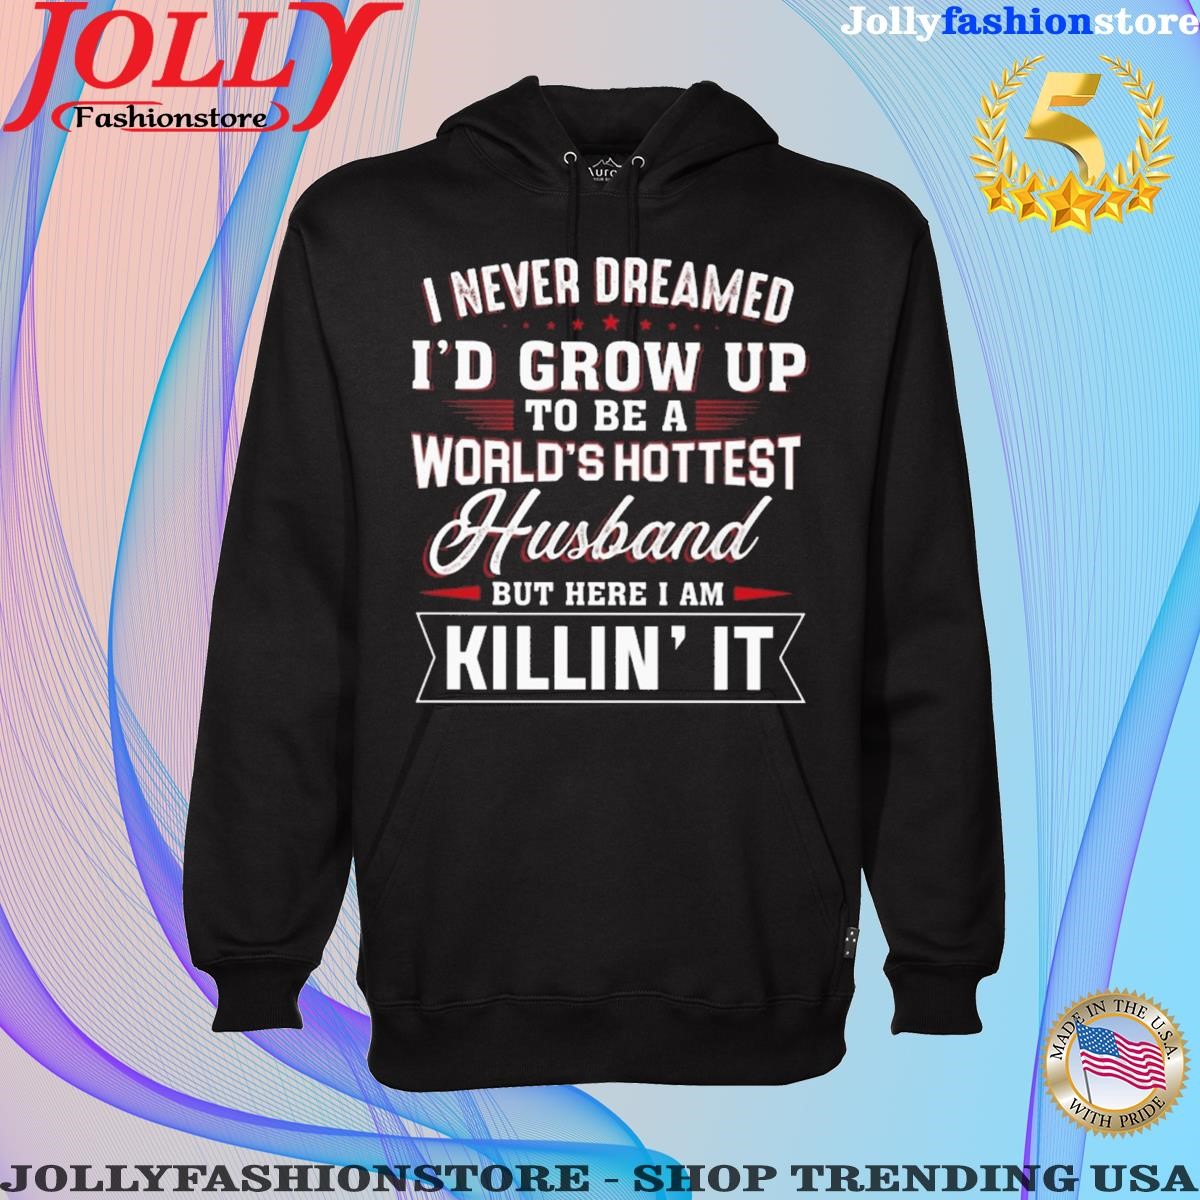 I never dreamed I'd grow up to be a world's hottest husband but here I am killin it shirt Hoodie shirt.png